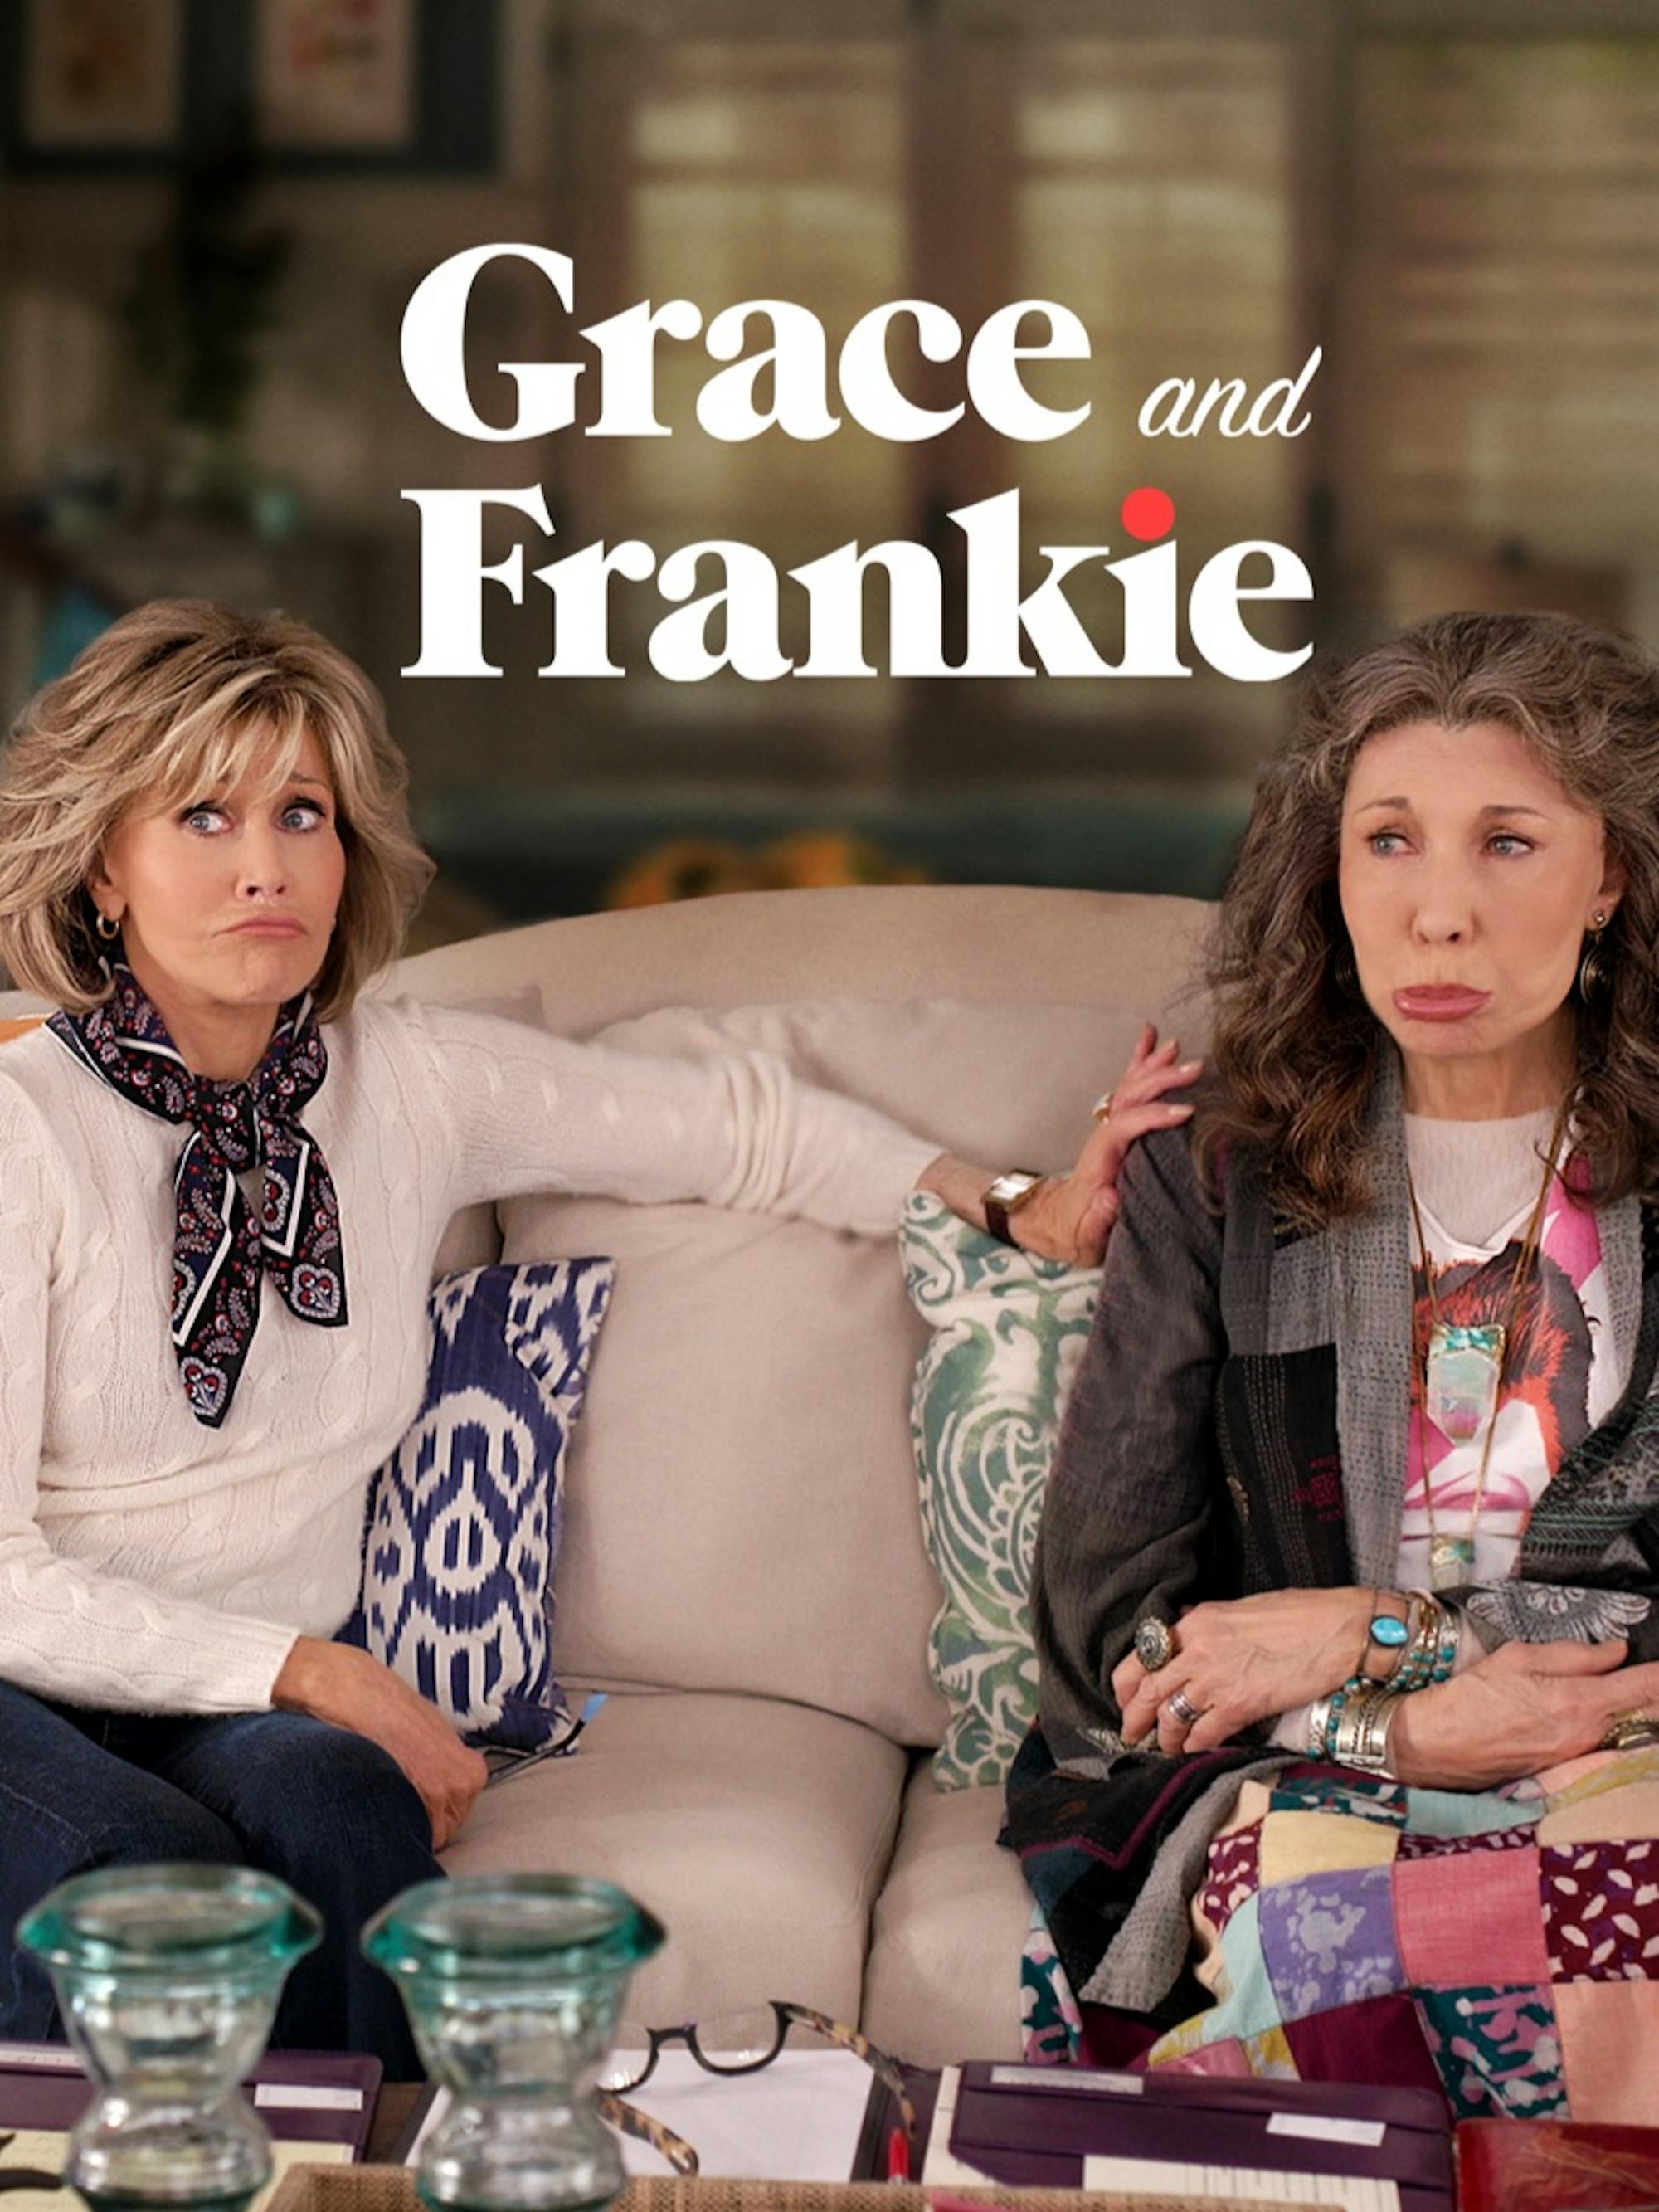 Grace and Frankie sit on a beige couch with multi colored pillows, making silly pouting faces. There are books, reading glasses, and candlestick holders in front of them, and they are dressed in their quintessential, although very different, style. 